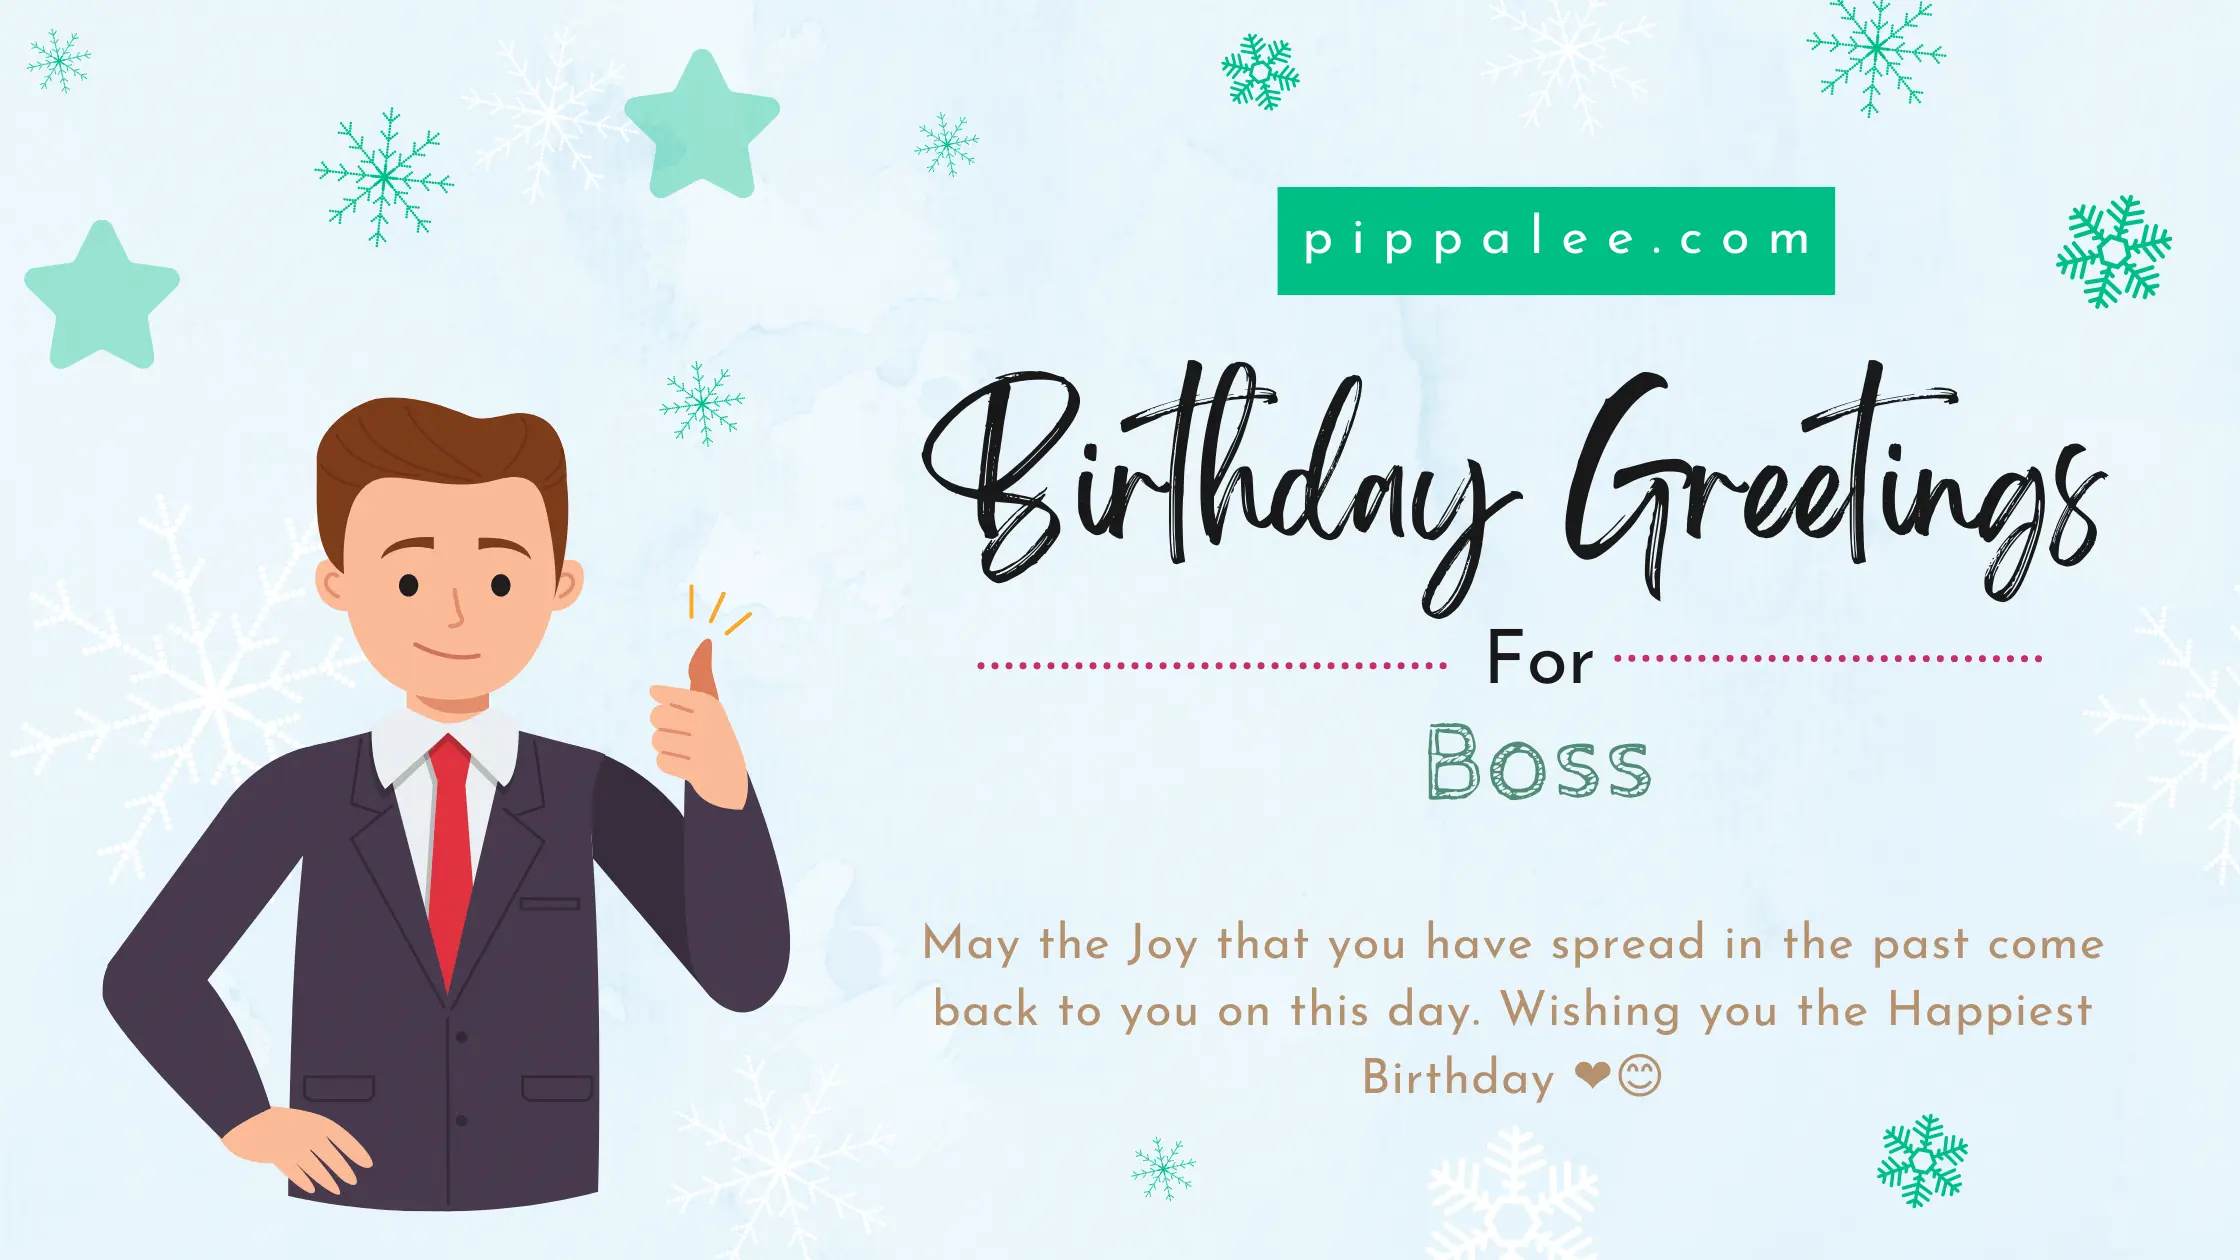 Birthday Greetings for Boss - Ultimate List of Wishes